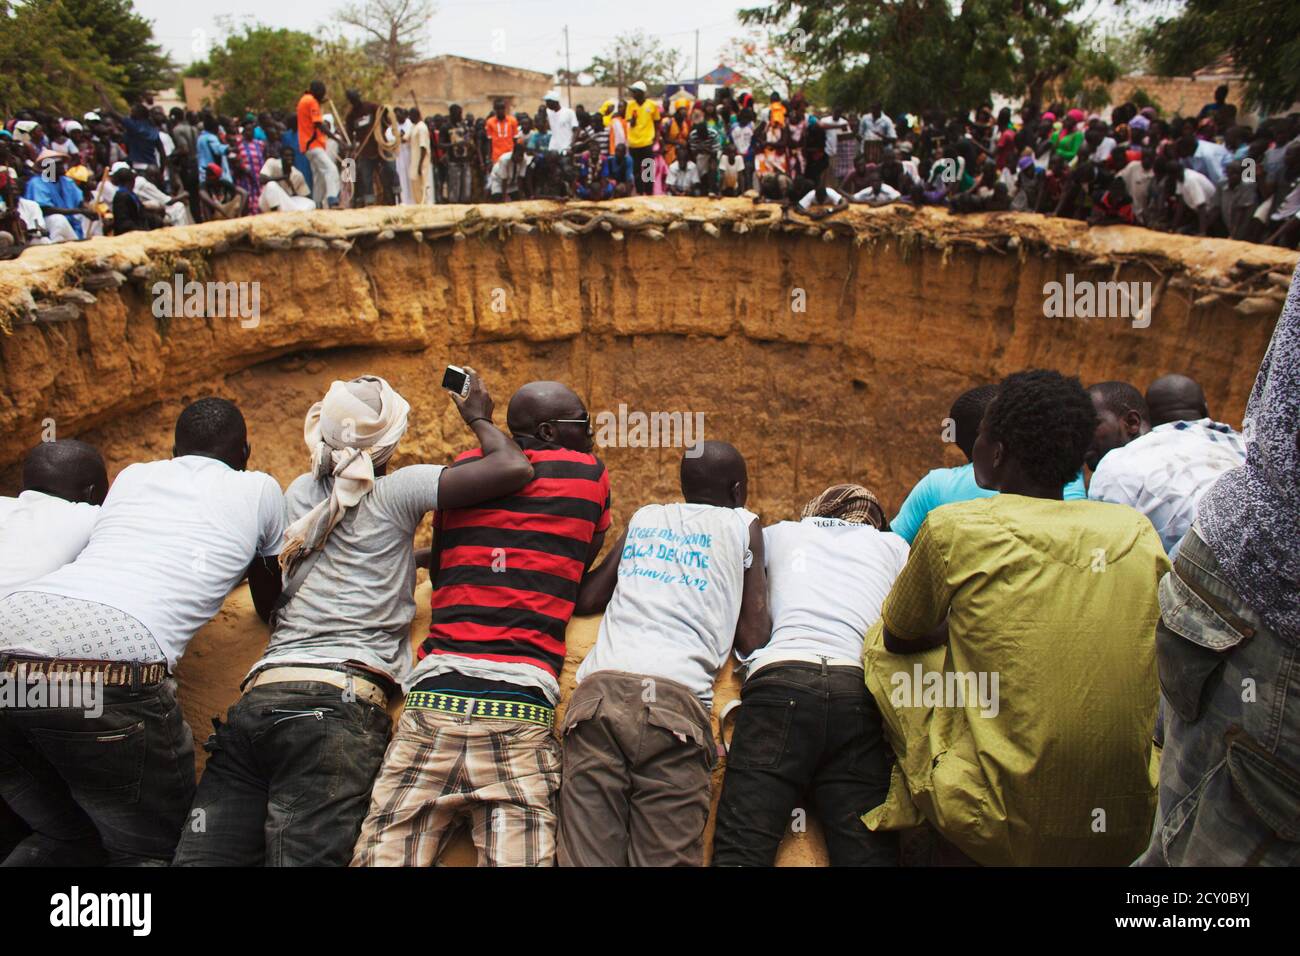 People watch a traditional ceremony taking place in a large former well in  the village of Ndande, Senegal, May 19, 2013. Every year, inhabitants of  the village take part in a Sufi